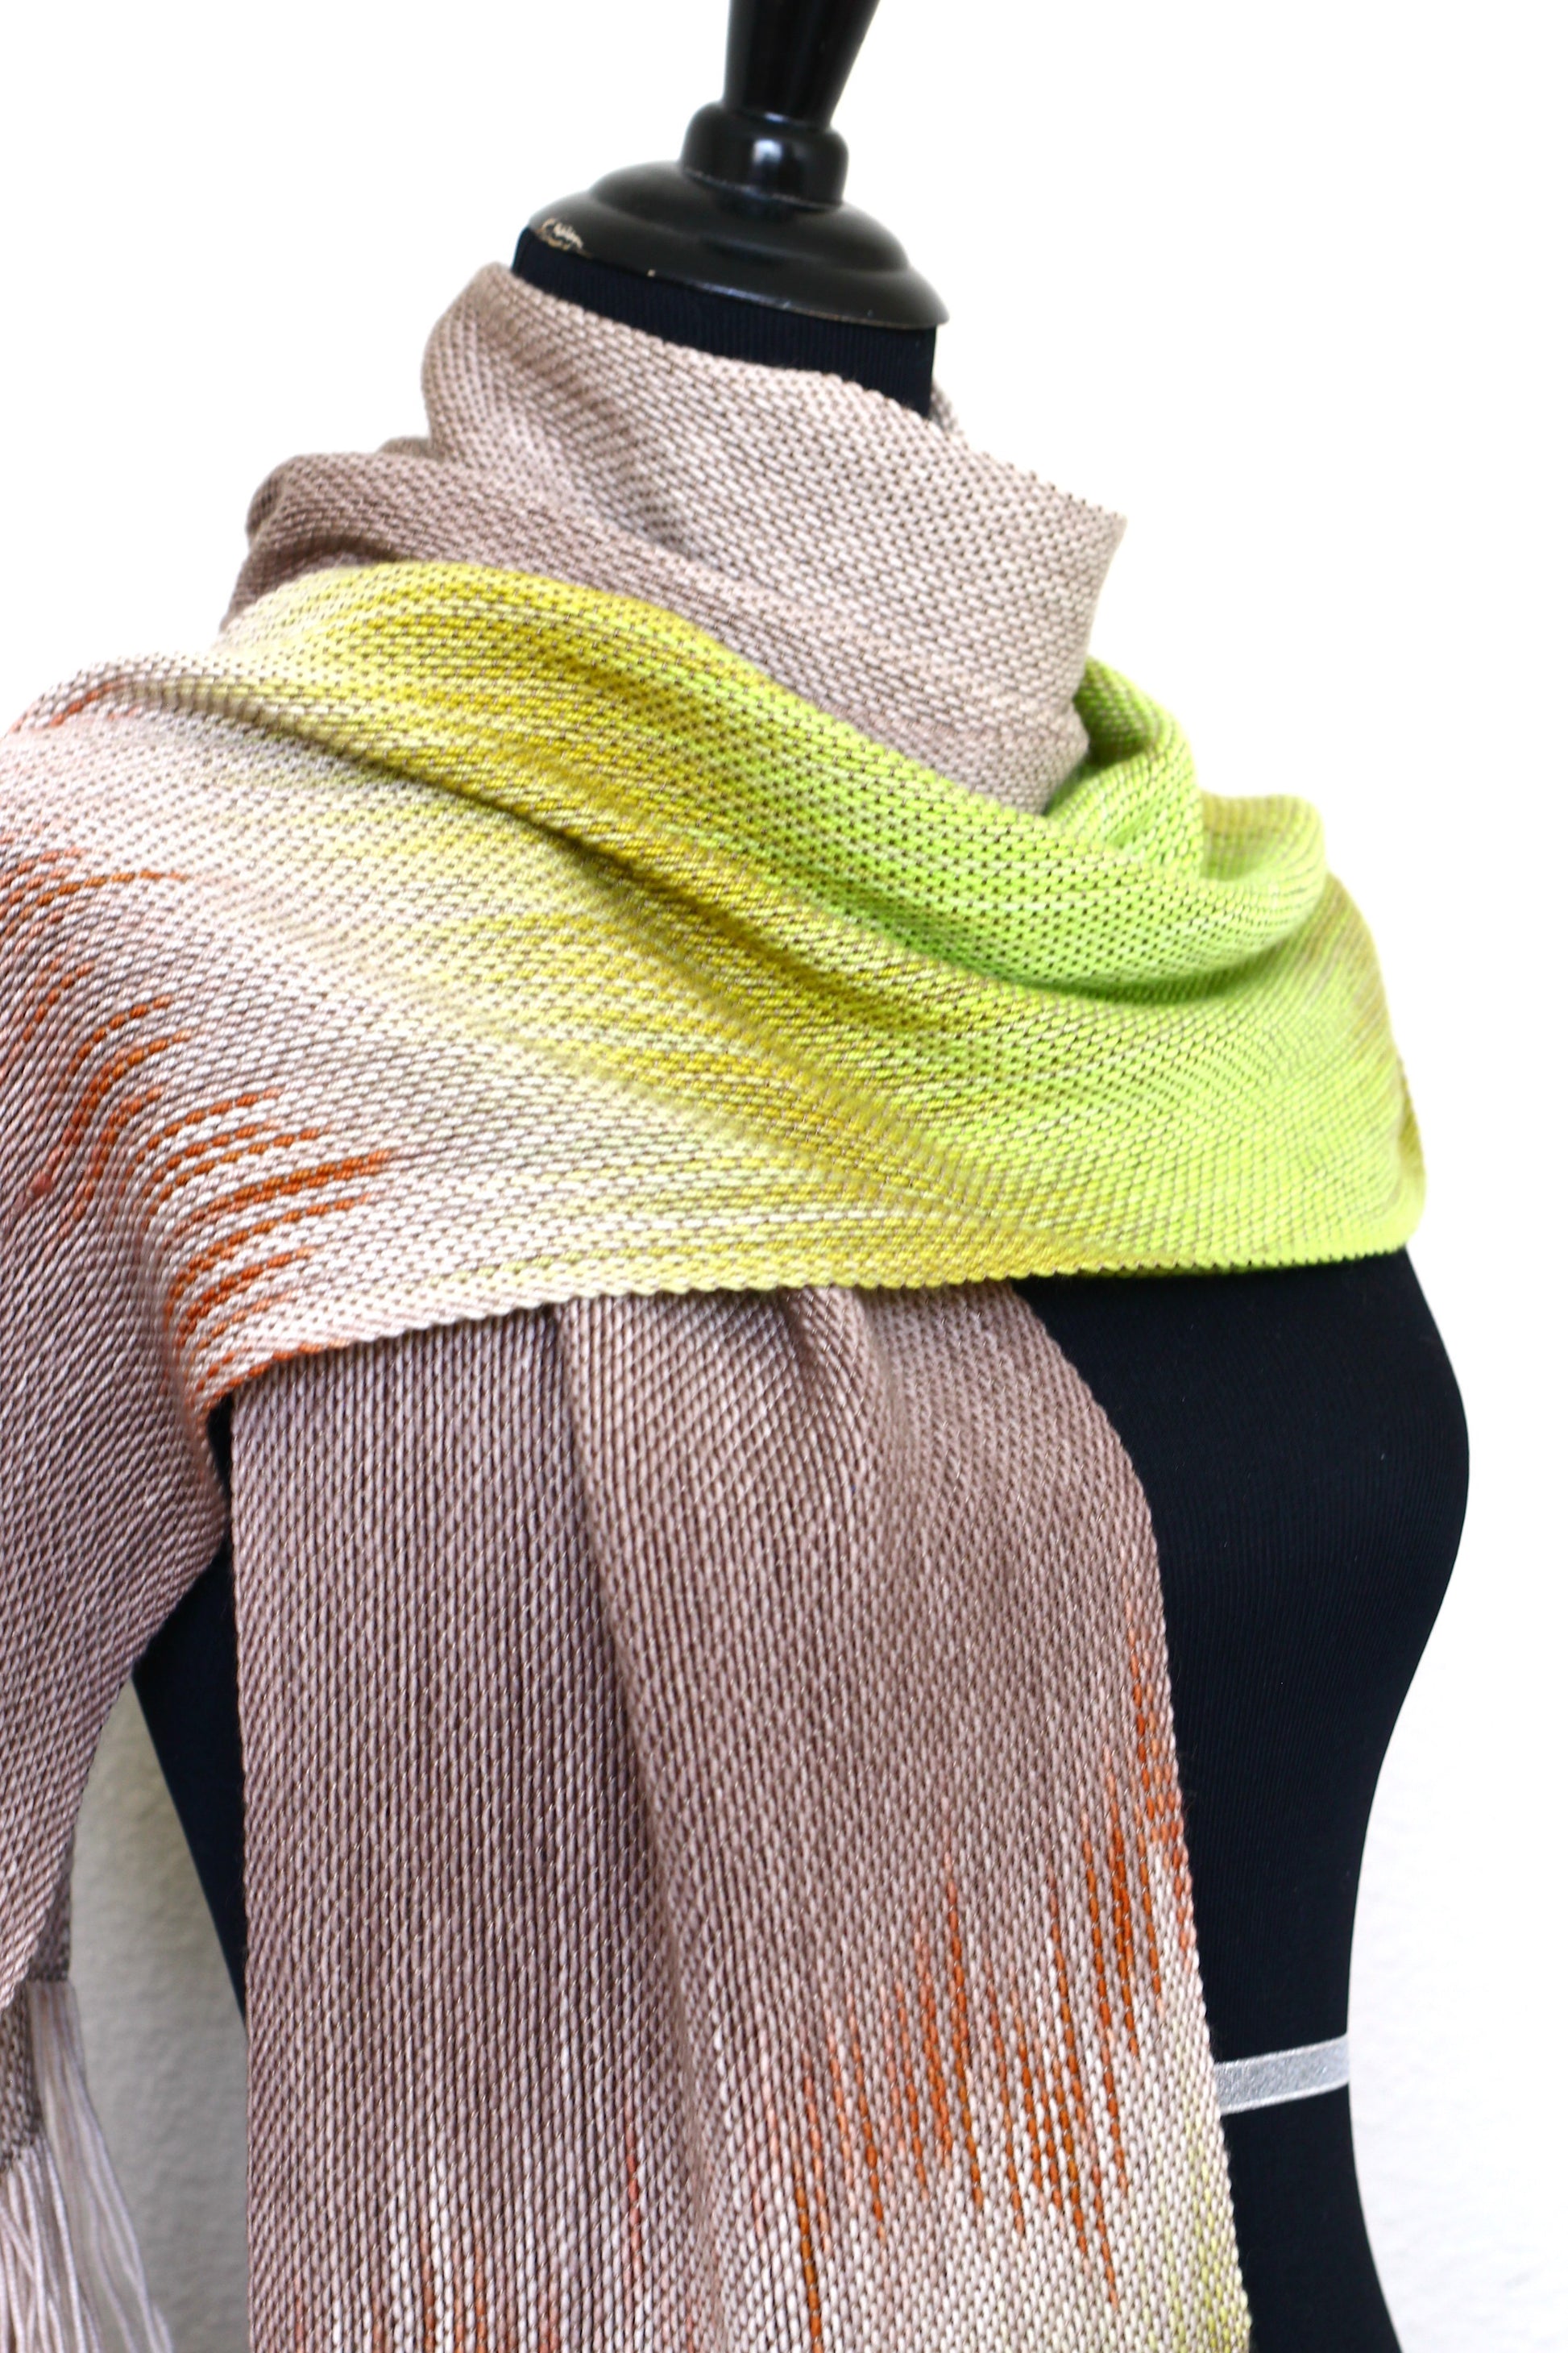 Woven scarf in beige and citron green colors, gift for her, gift for him